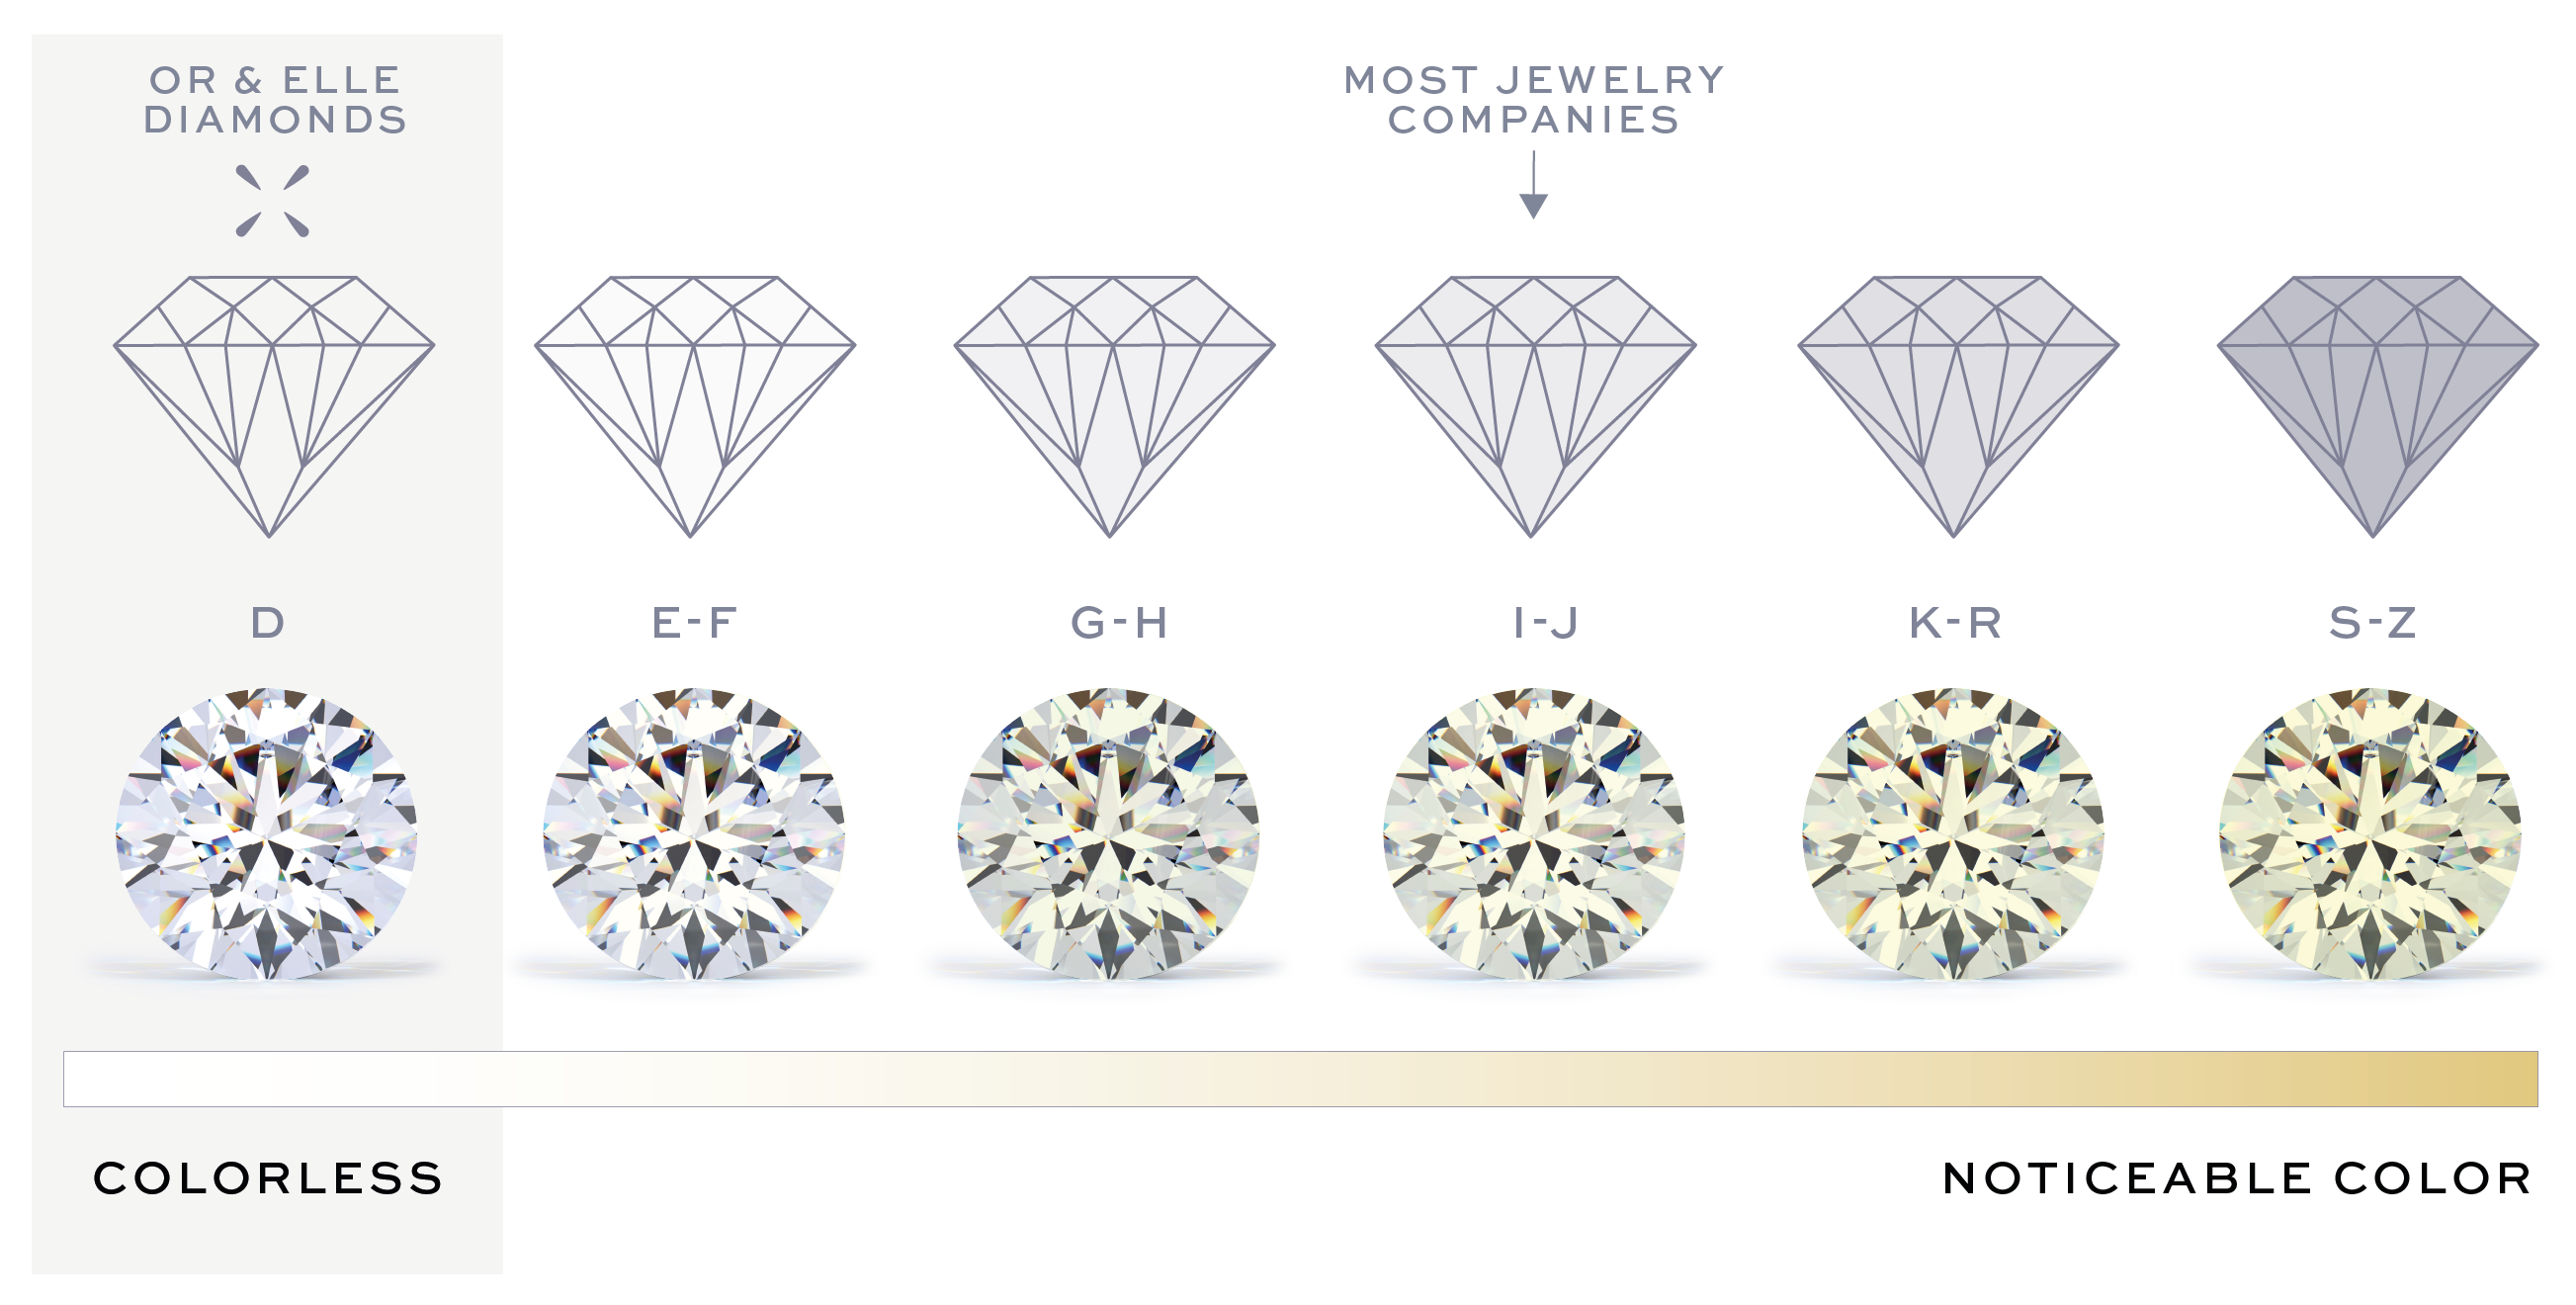 Color The rarest and most ideal diamonds are colorless, or grade D. As diamonds show increase hues of yellow, their color grade decreases. Most jewelers use grade I-J diamonds and lower. We only use D color diamonds - as shown in the graph, which are colorless.